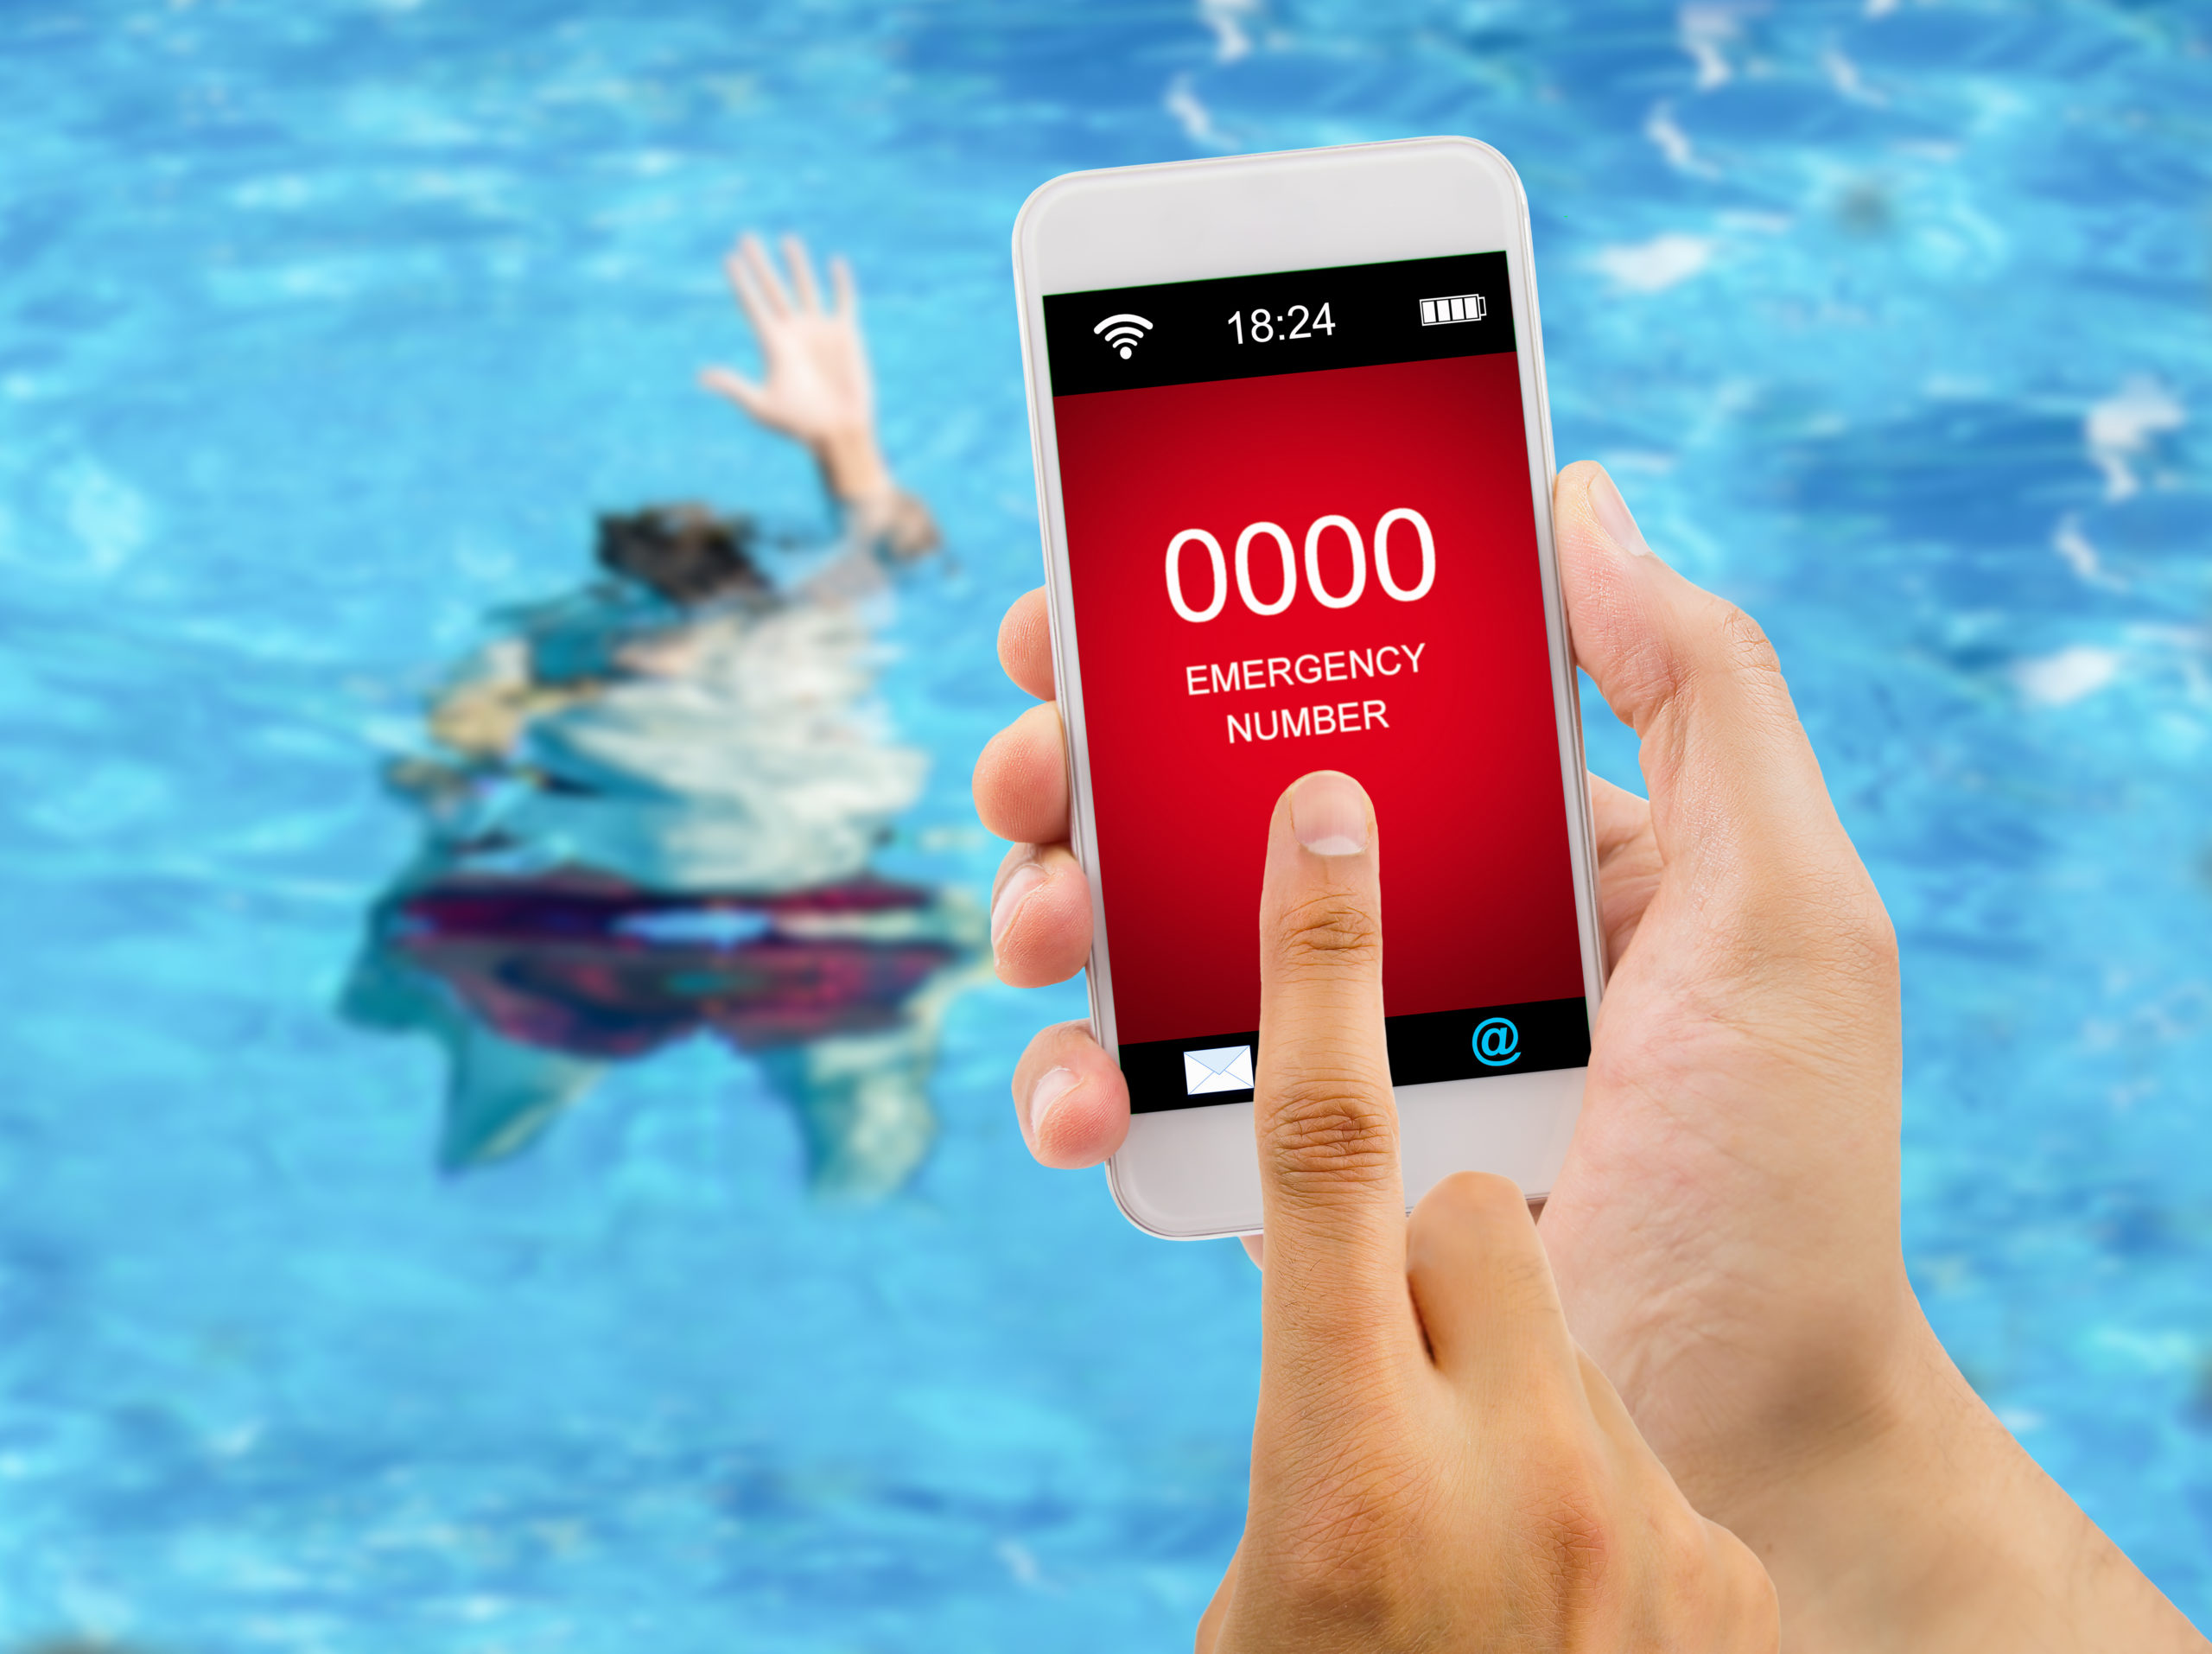 A smart device, such as a smartphone or tablet, being used to control and automate various functions of a swimming pool